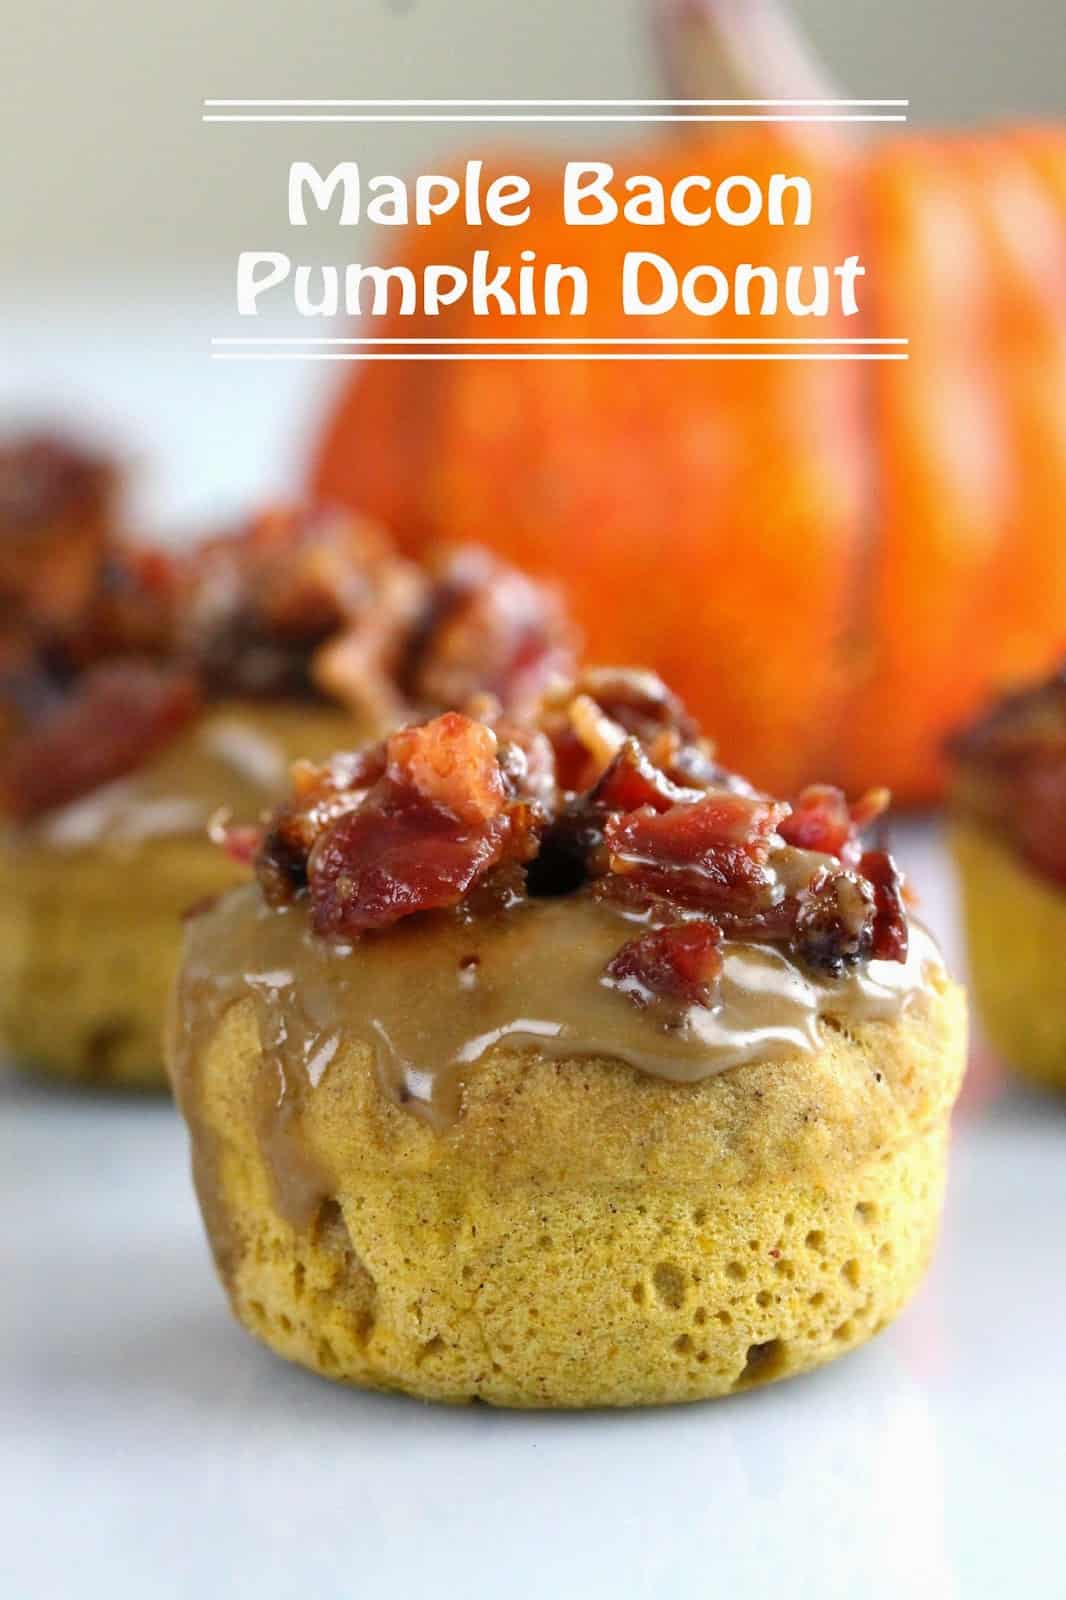 Maple bacon pumpkin donut with the text "Maple Bacon Pumpkin Donut" above it.